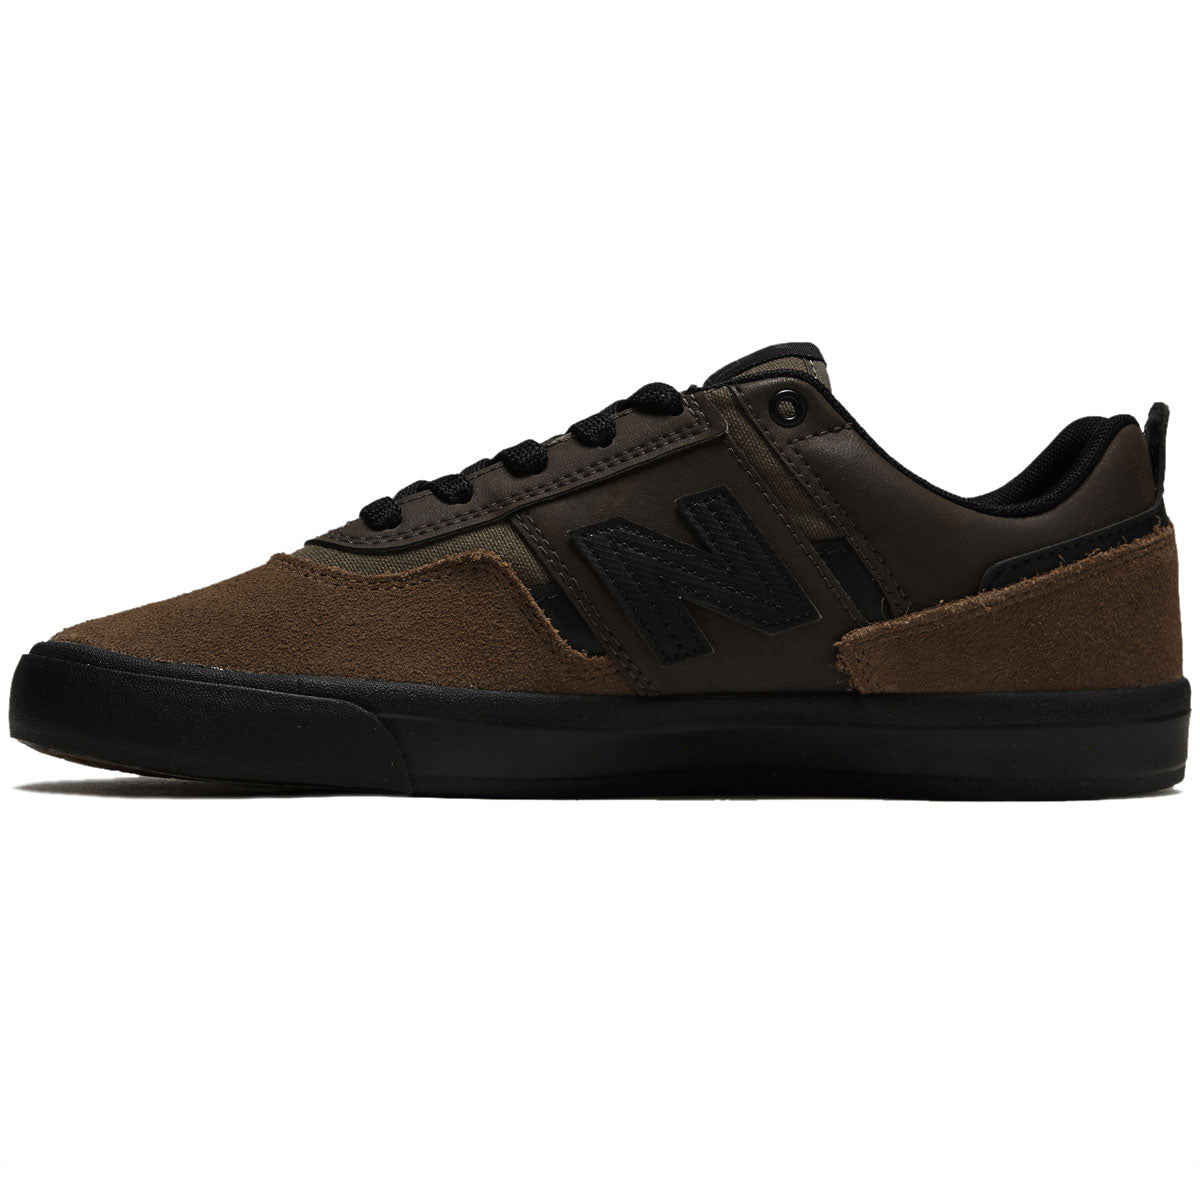 New Balance 306 Foy Shoes - Brown/Black image 2